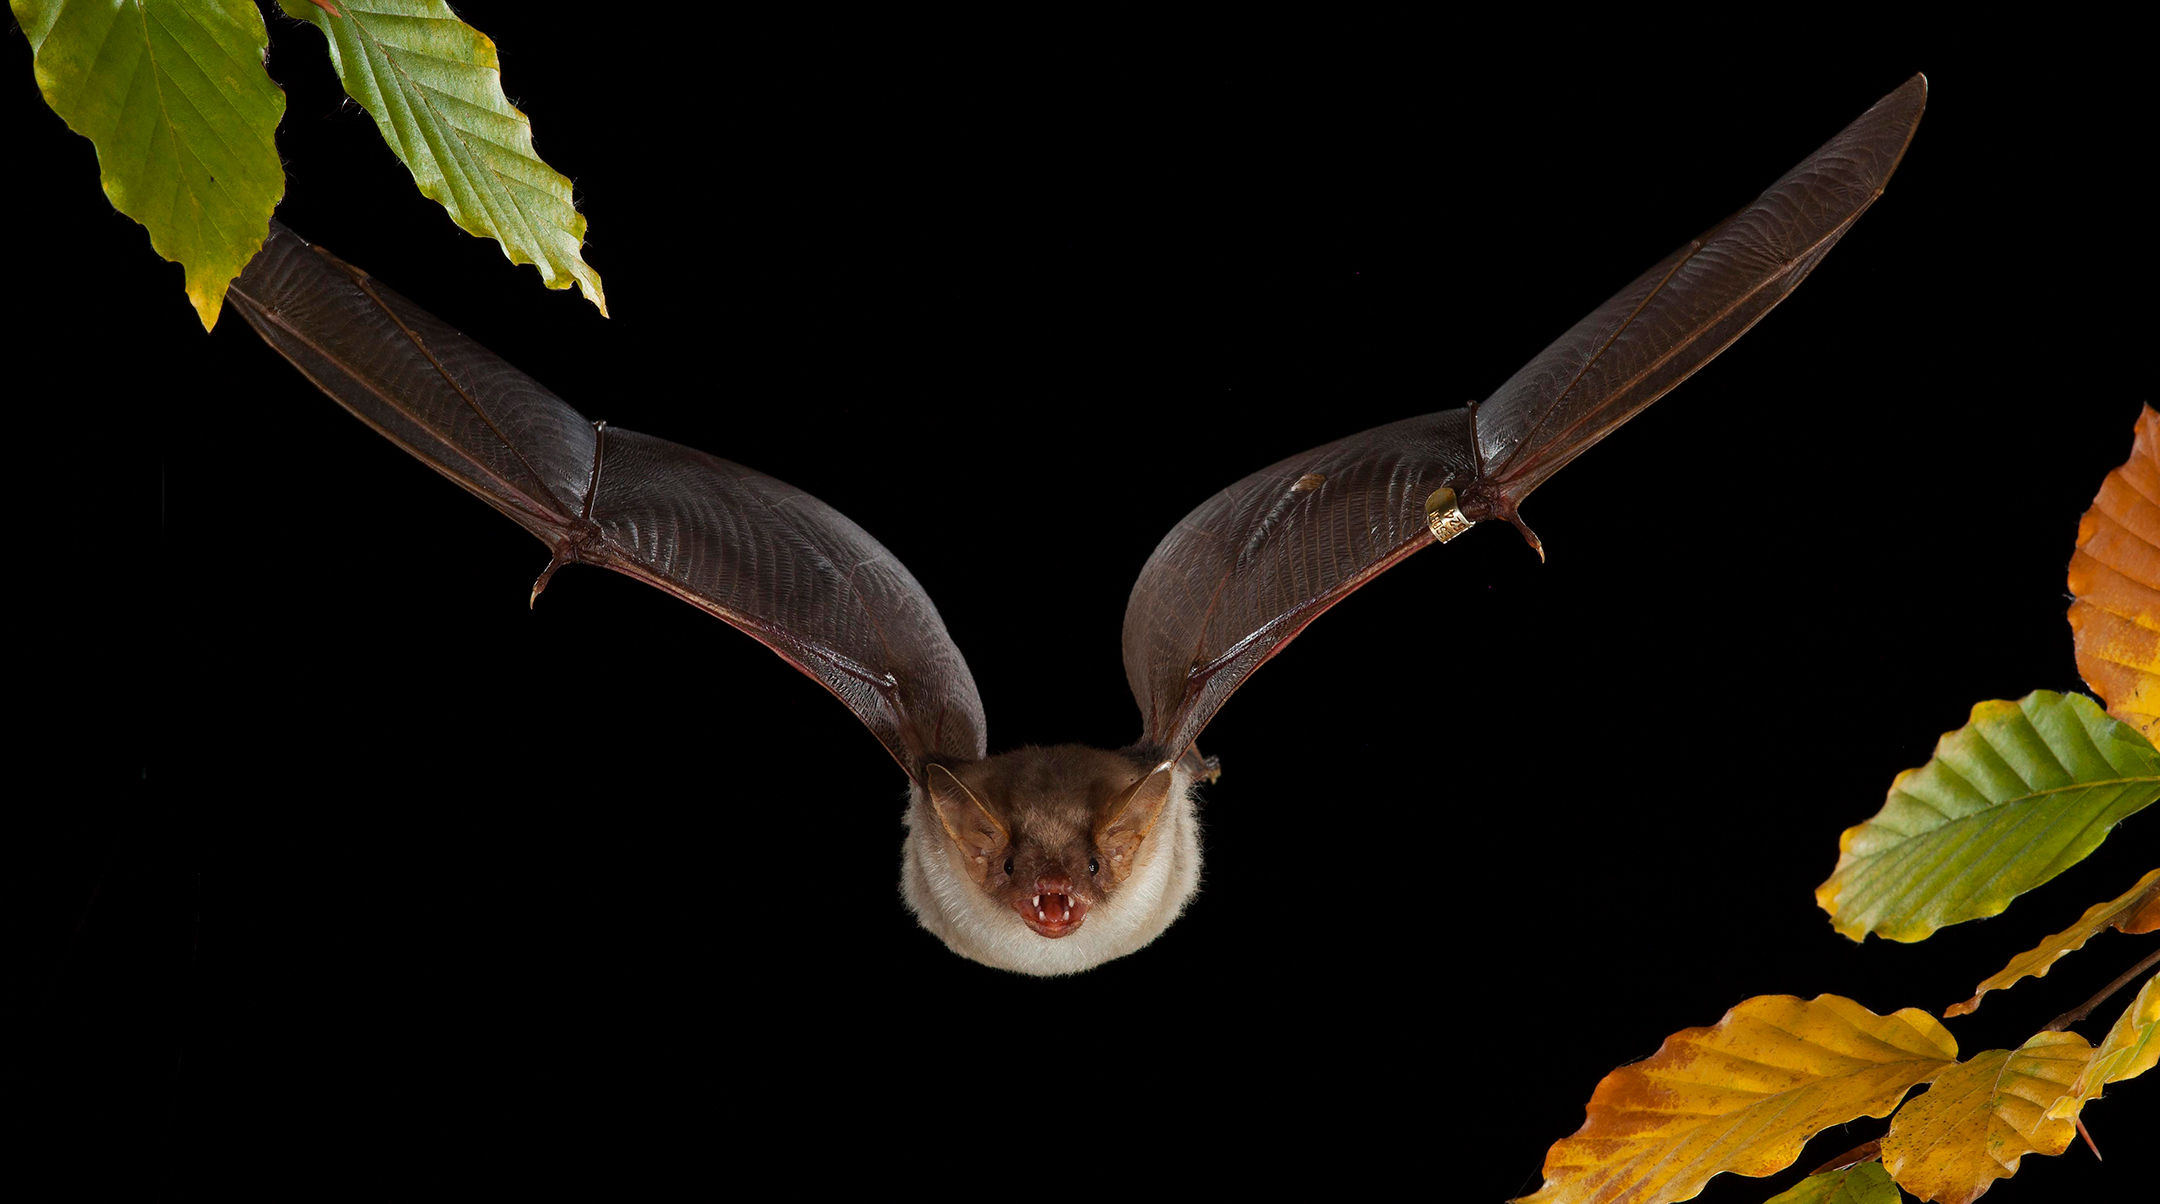 Greater mouse-eared bat (Myotis myotis) in flight, animal with ring for research purposes